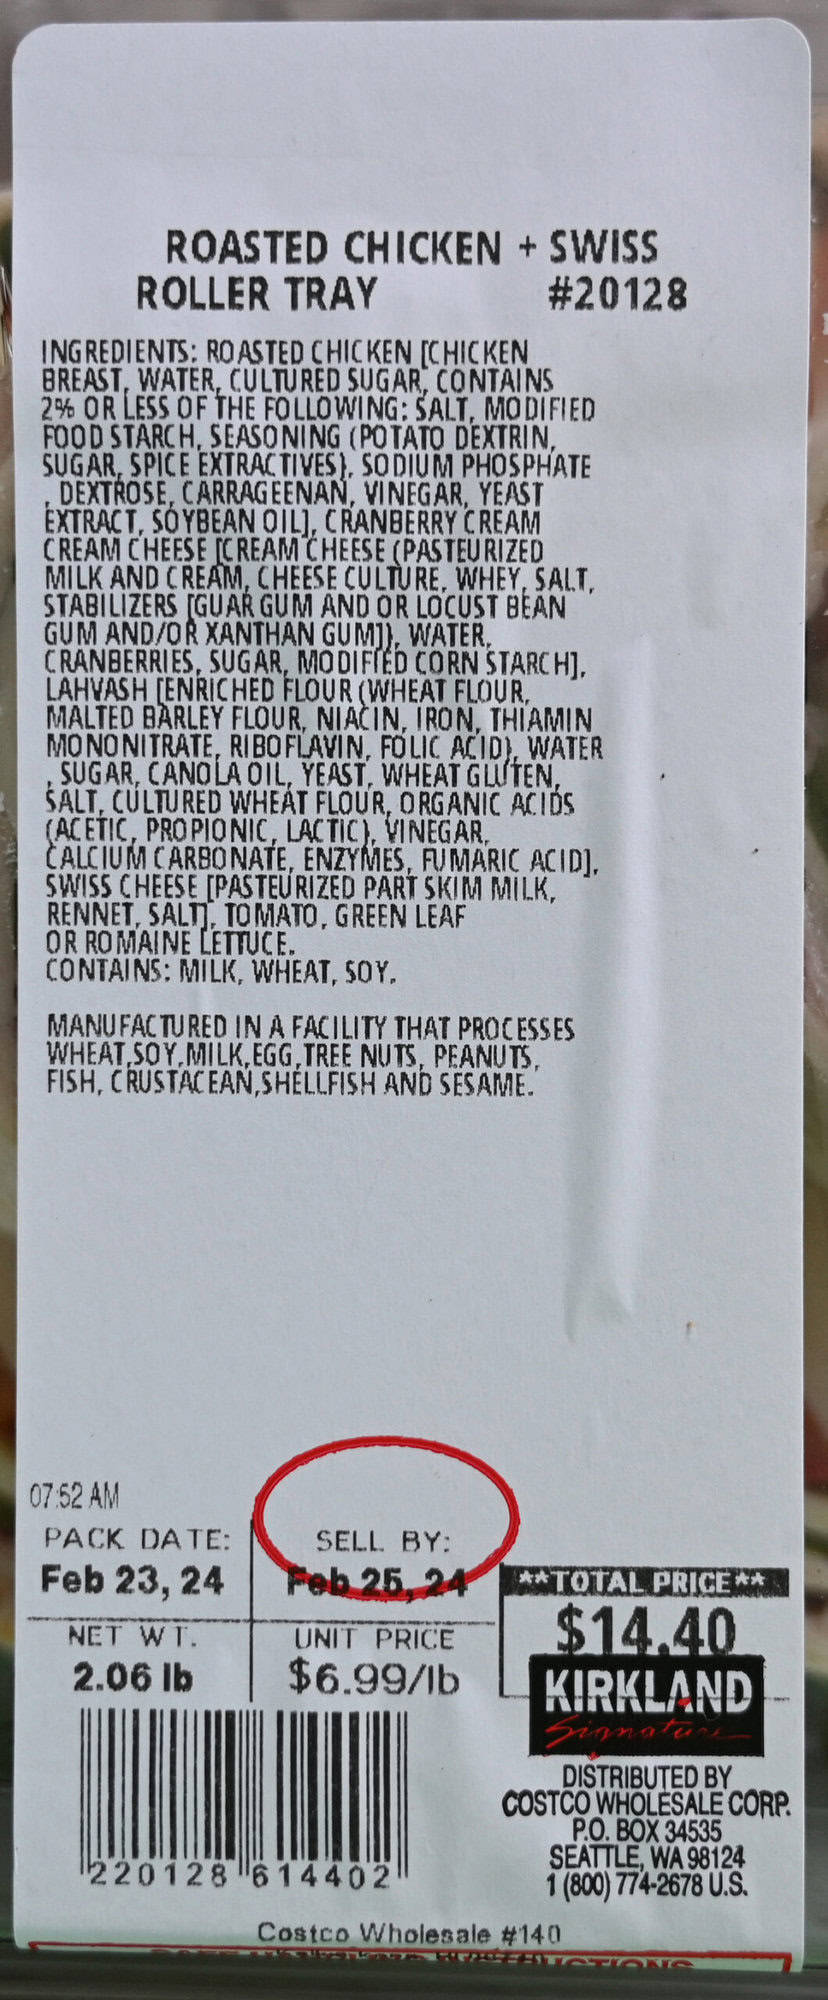 Image of the label from the packaging on the rollers showing ingredients, best before date, and cost.